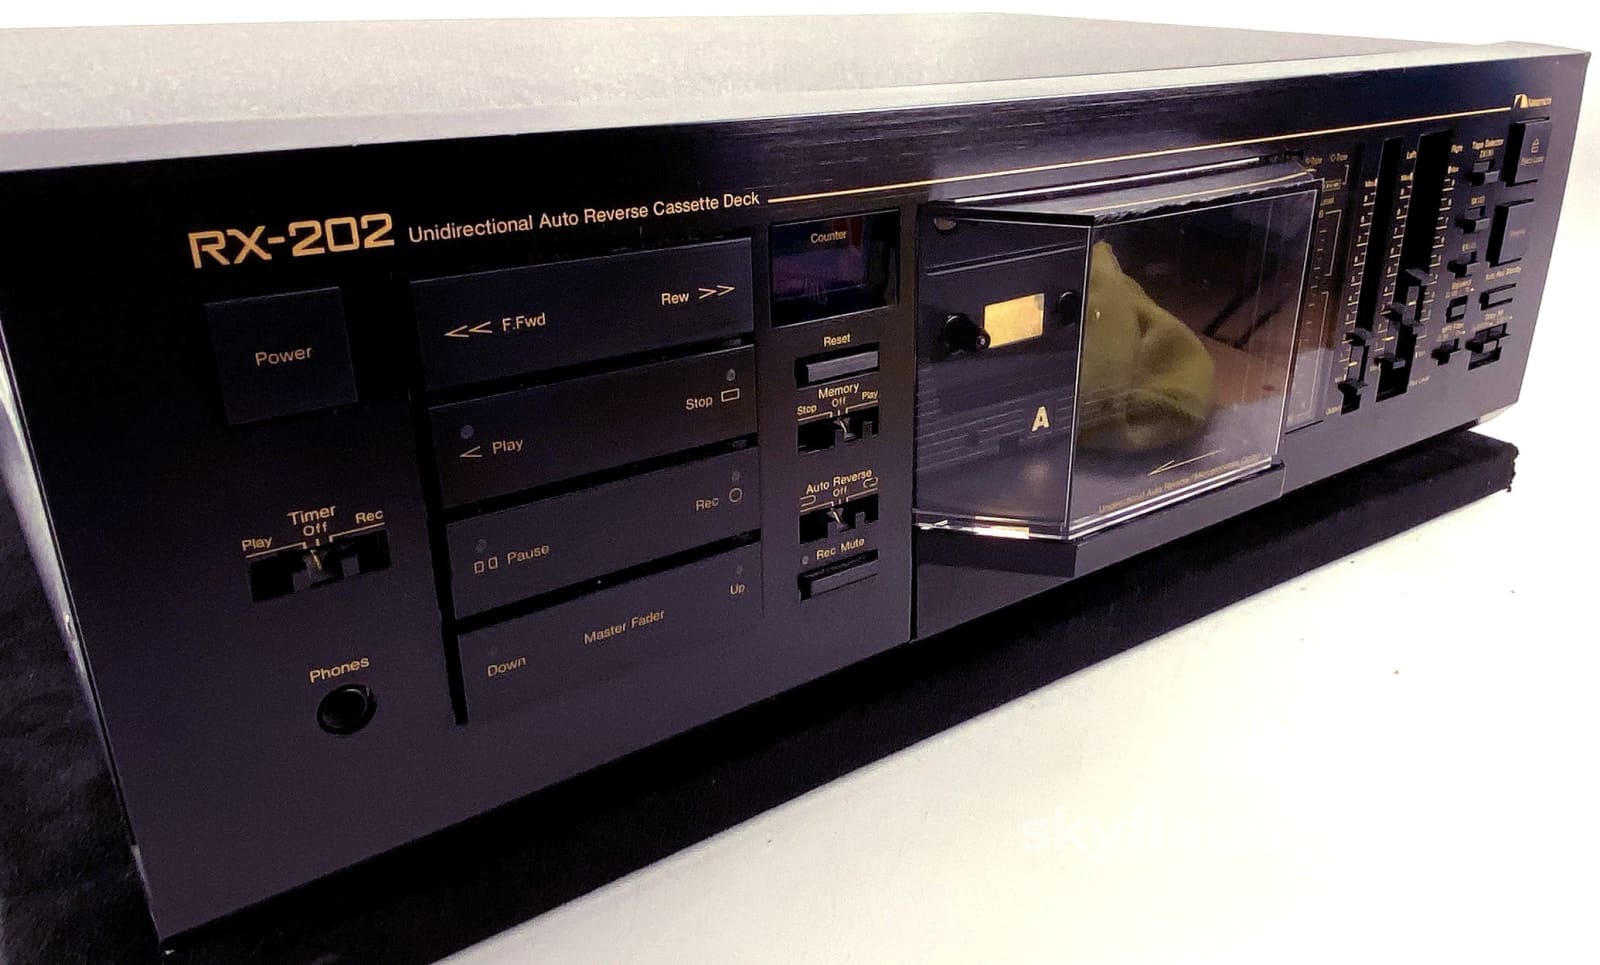 Nakamichi Rx-202 Unique Physical Auto Reversing Tape Deck (Udar) Freshly Serviced